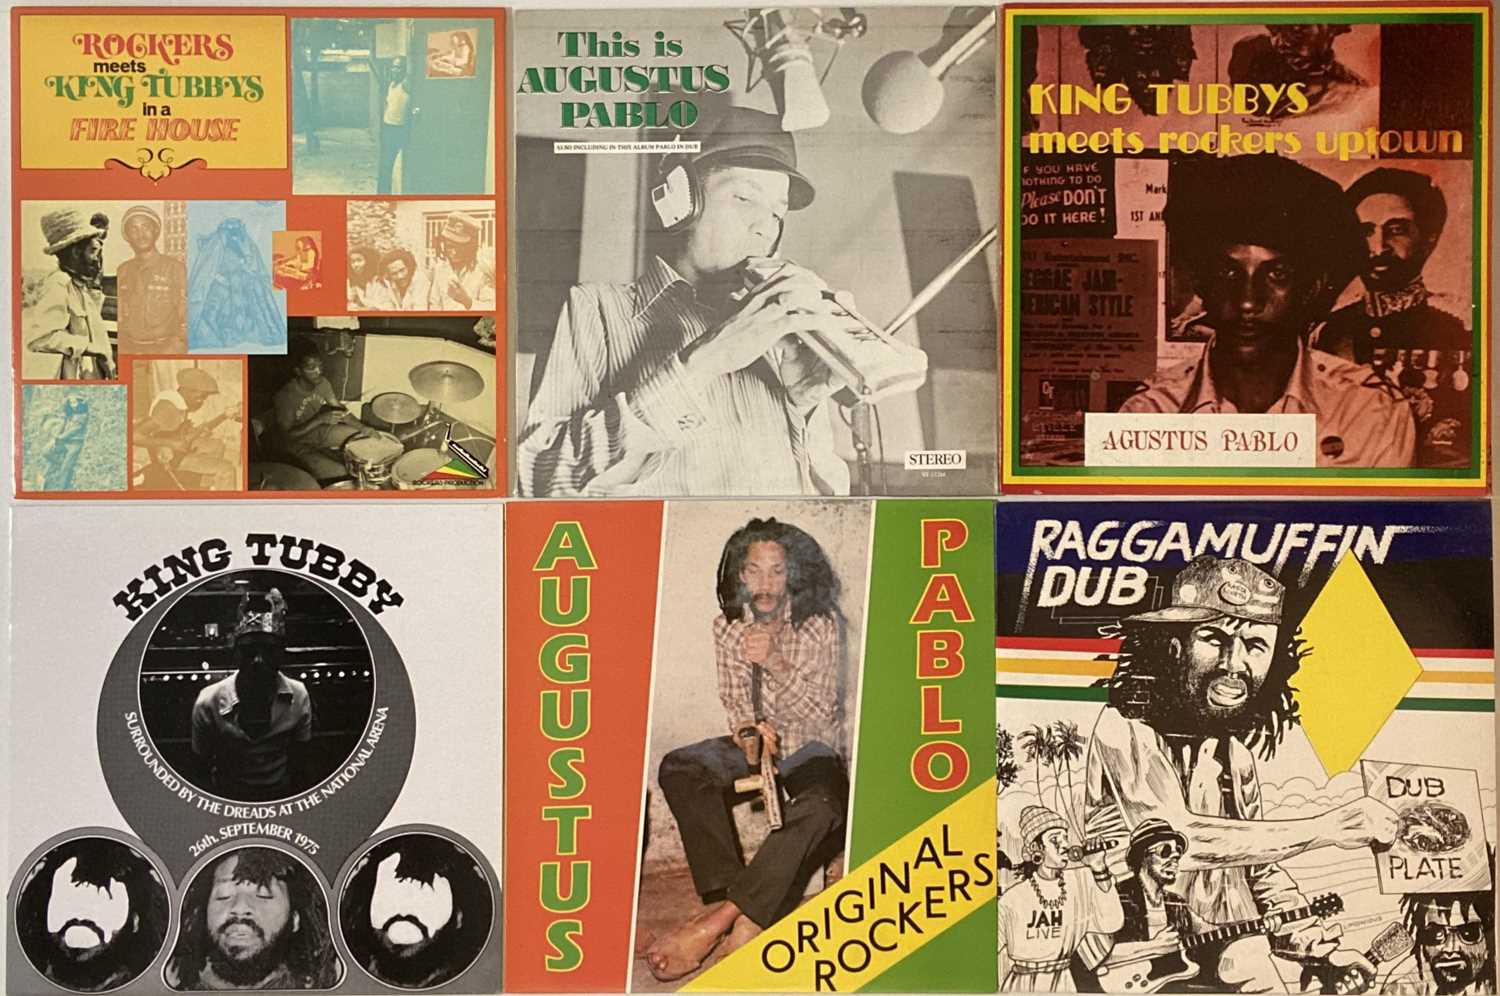 AUGUSTUS PABLO/KING TUBBY - LPs